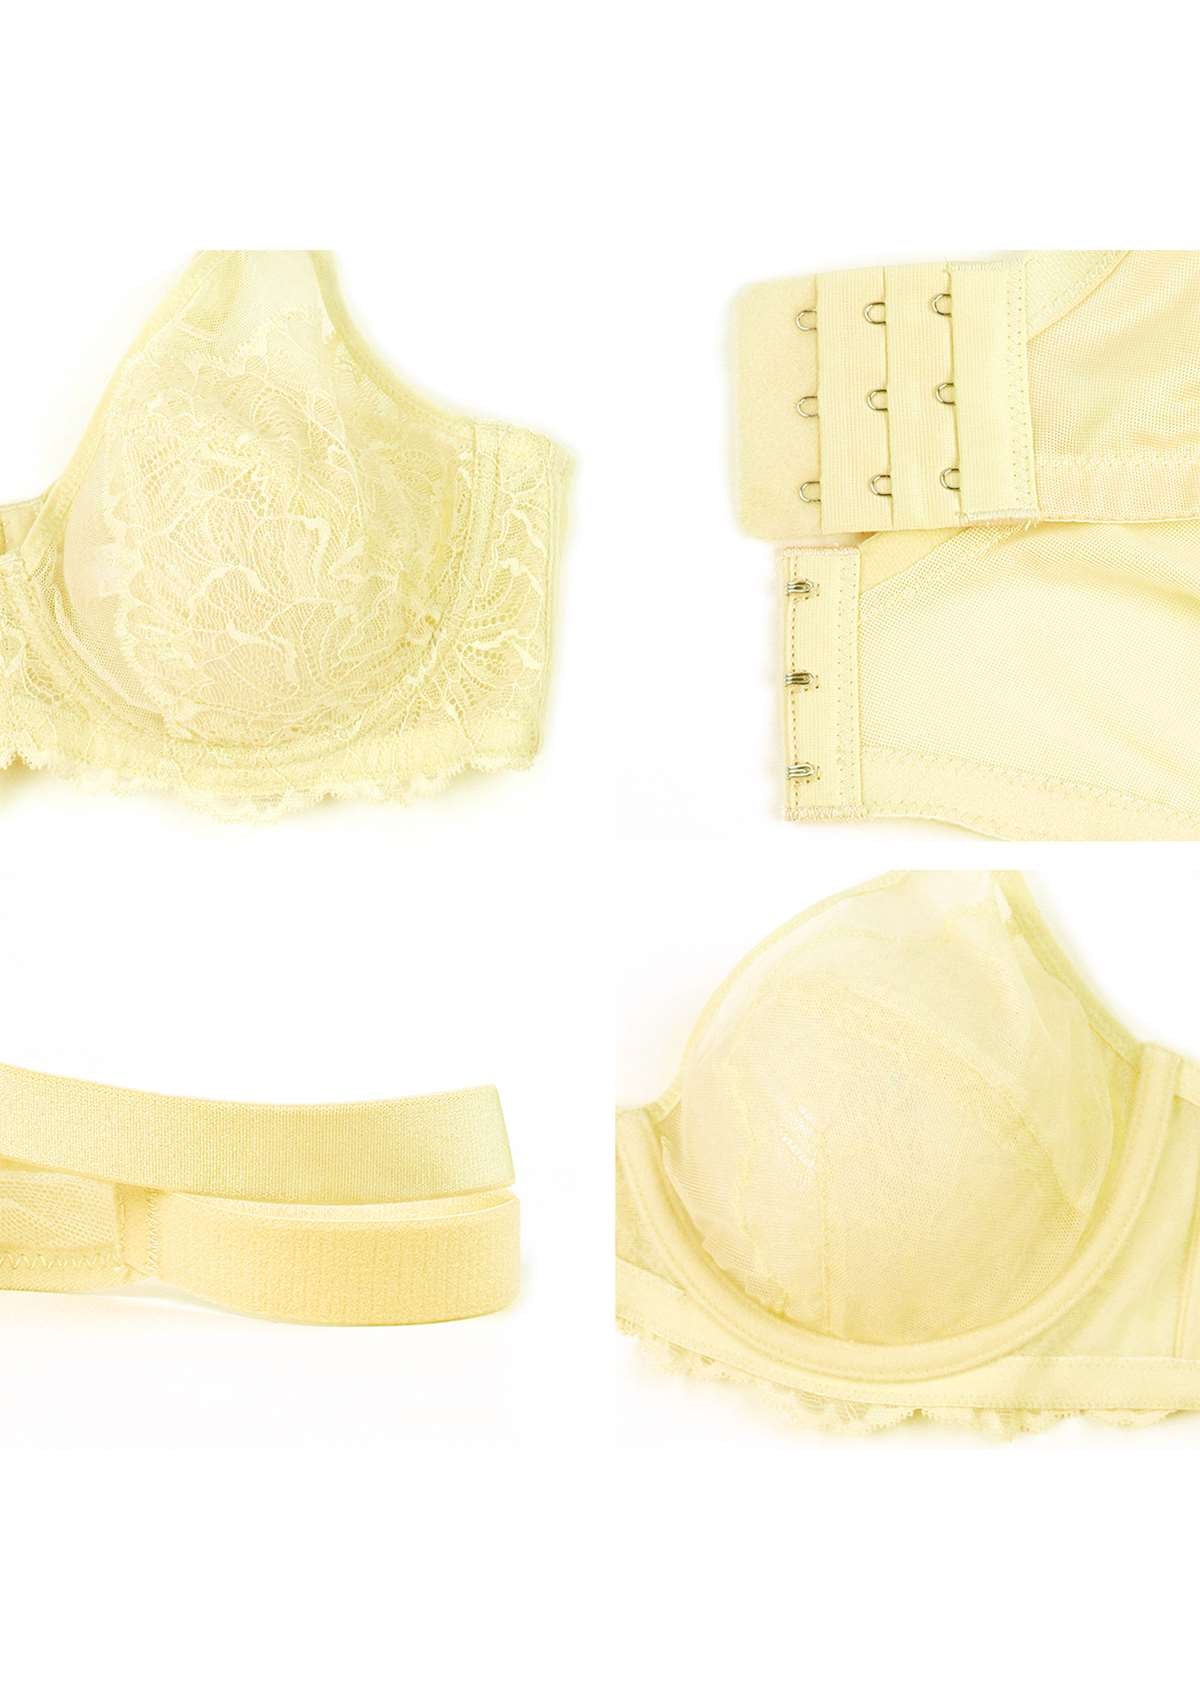 HSIA Blossom Full Coverage Side Support Bra: Designed For Heavy Busts - Beige / 42 / G